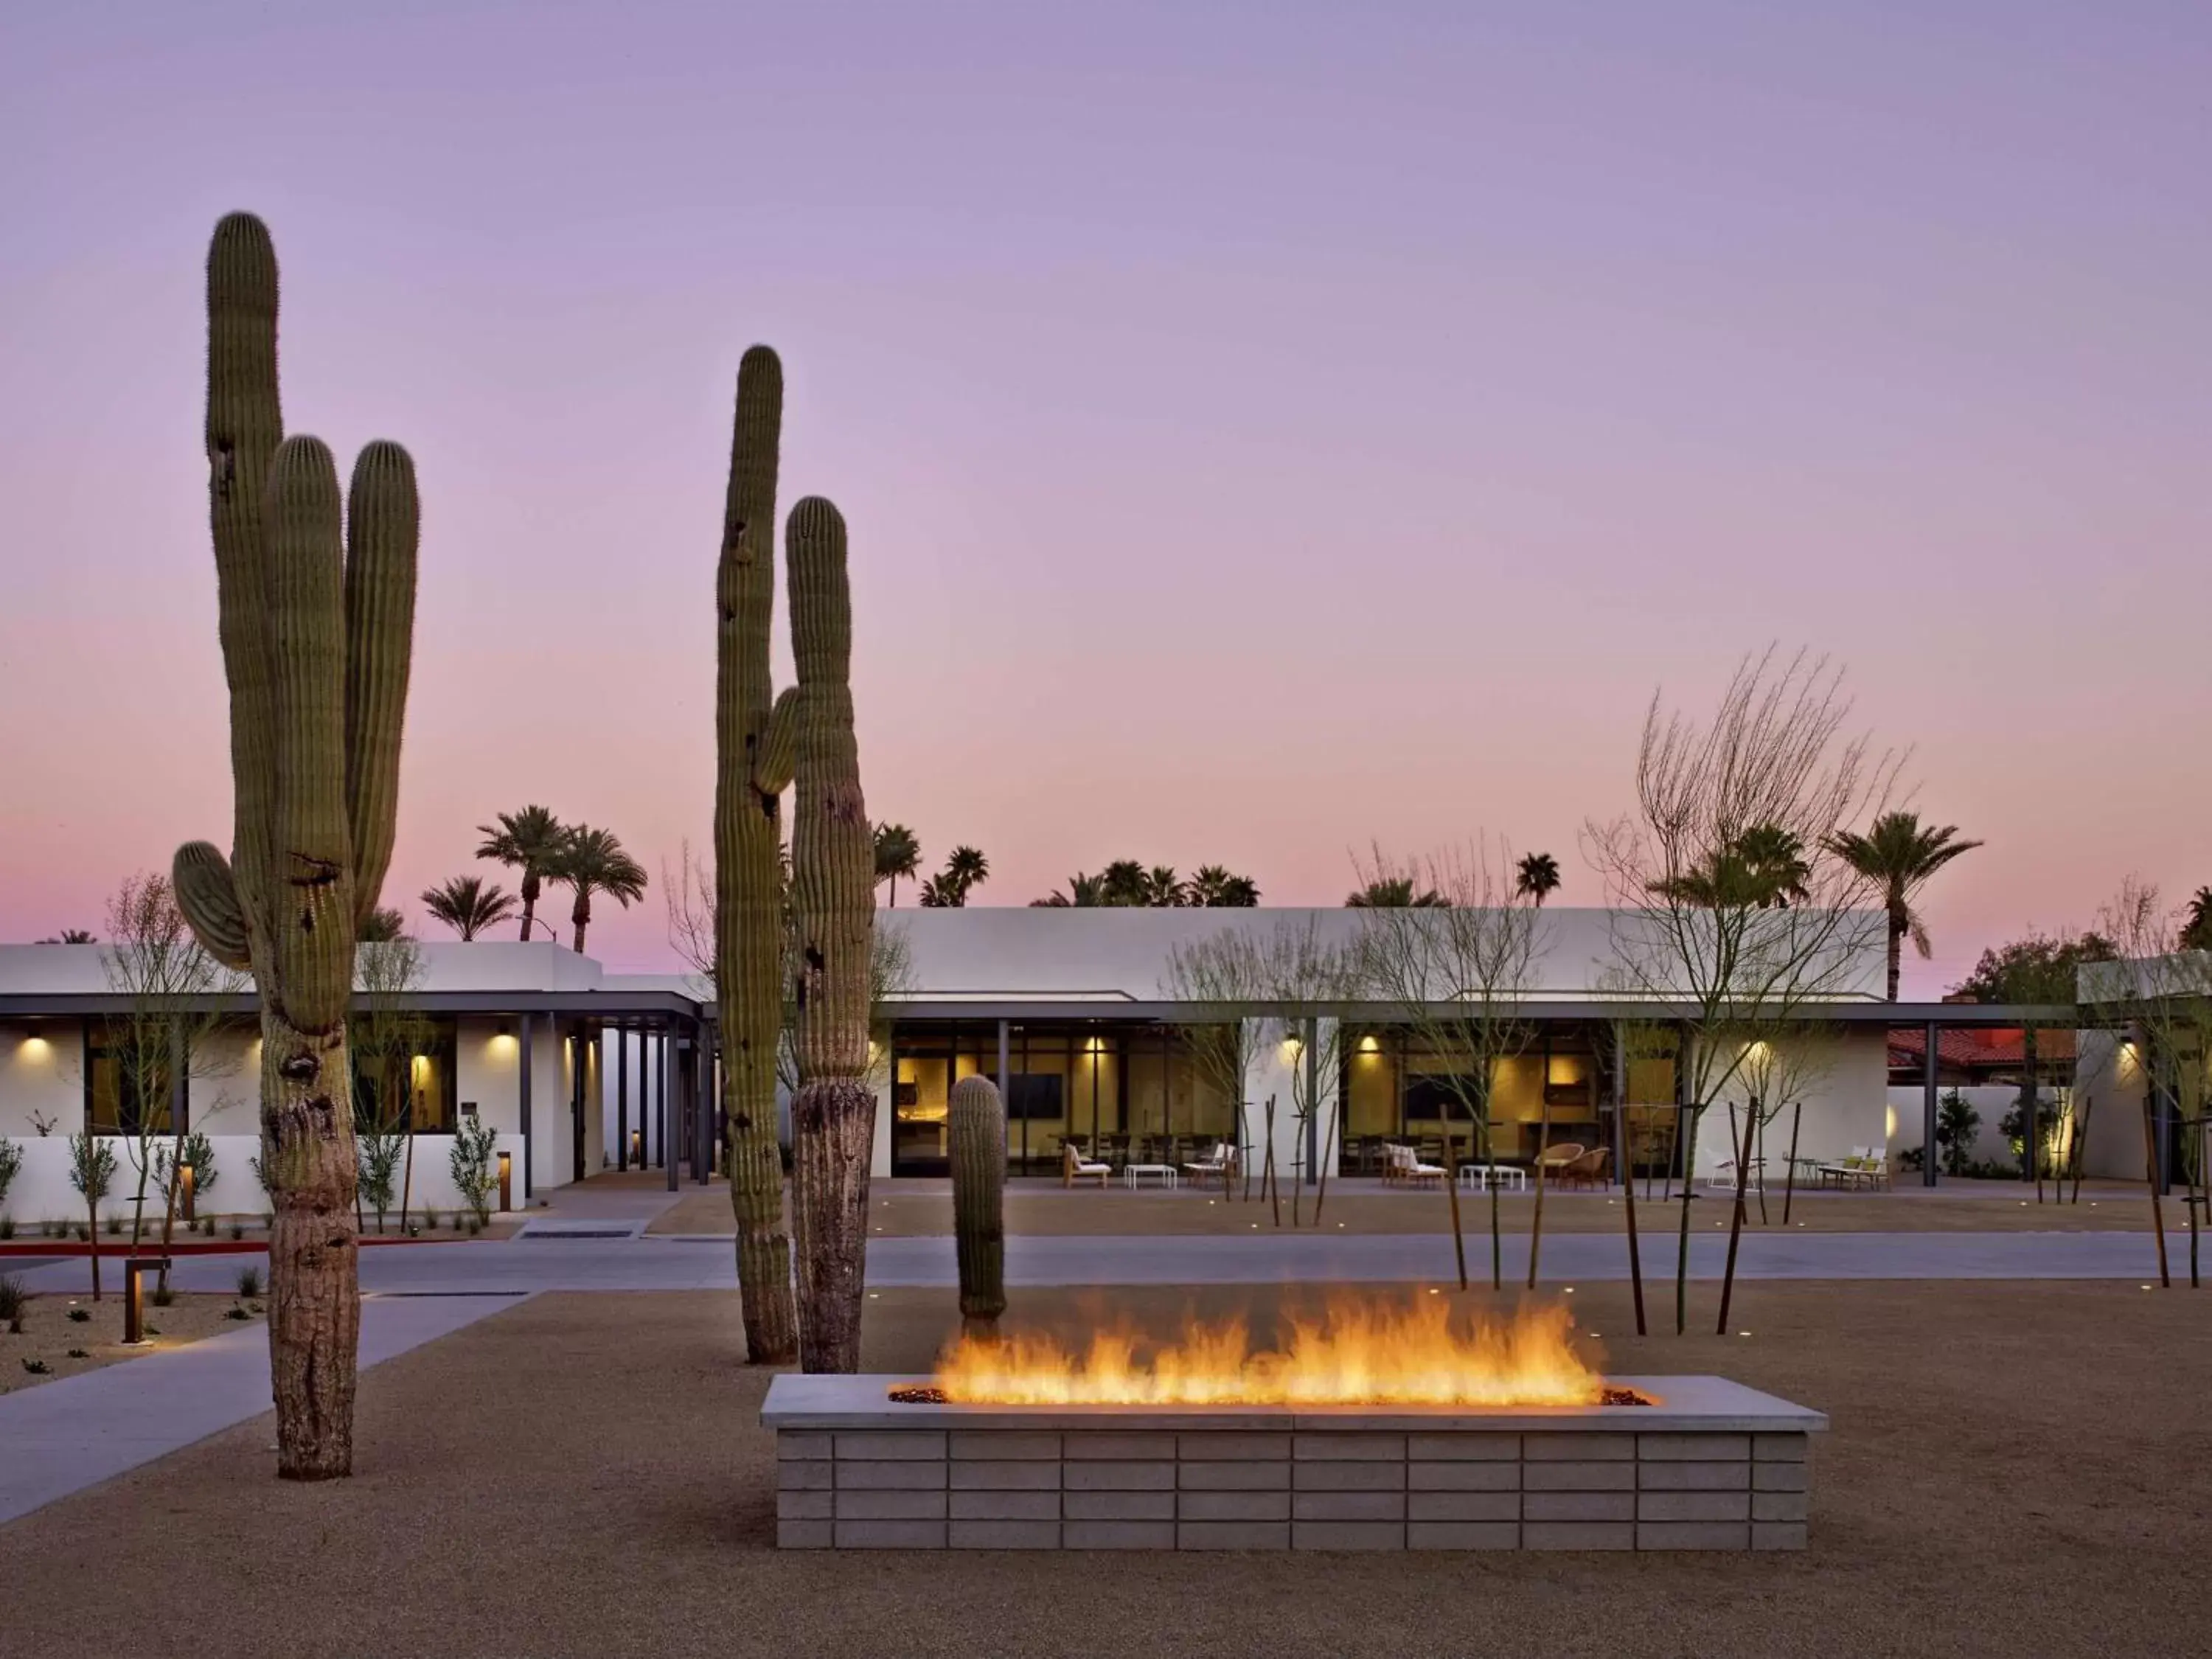 Property building in Andaz Scottsdale Resort & Bungalows